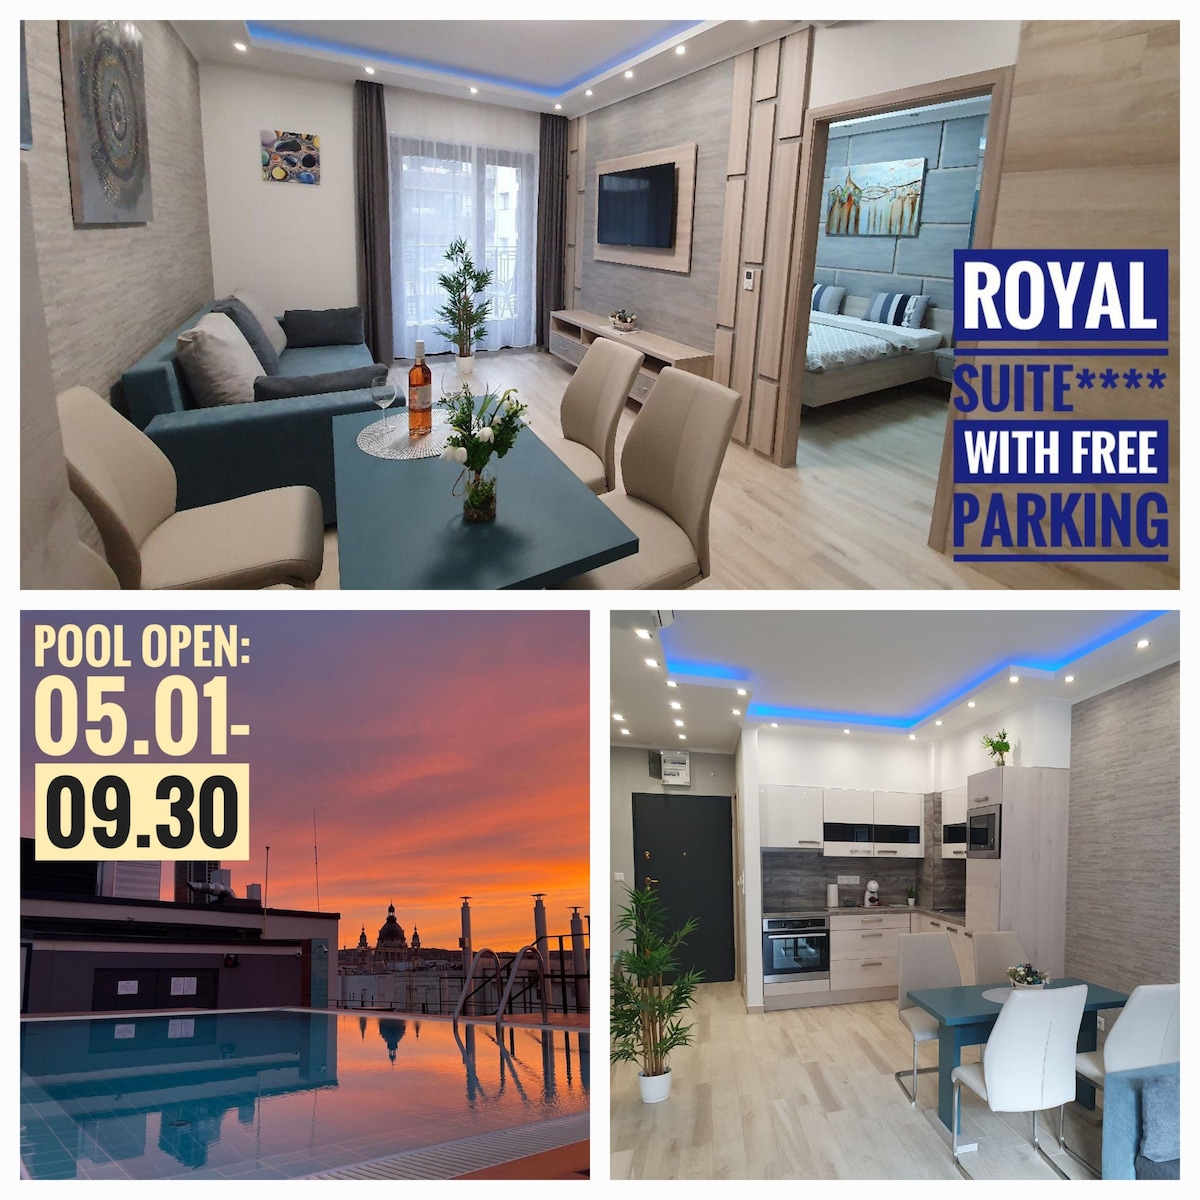 Royal suite in the center with free parking "blue